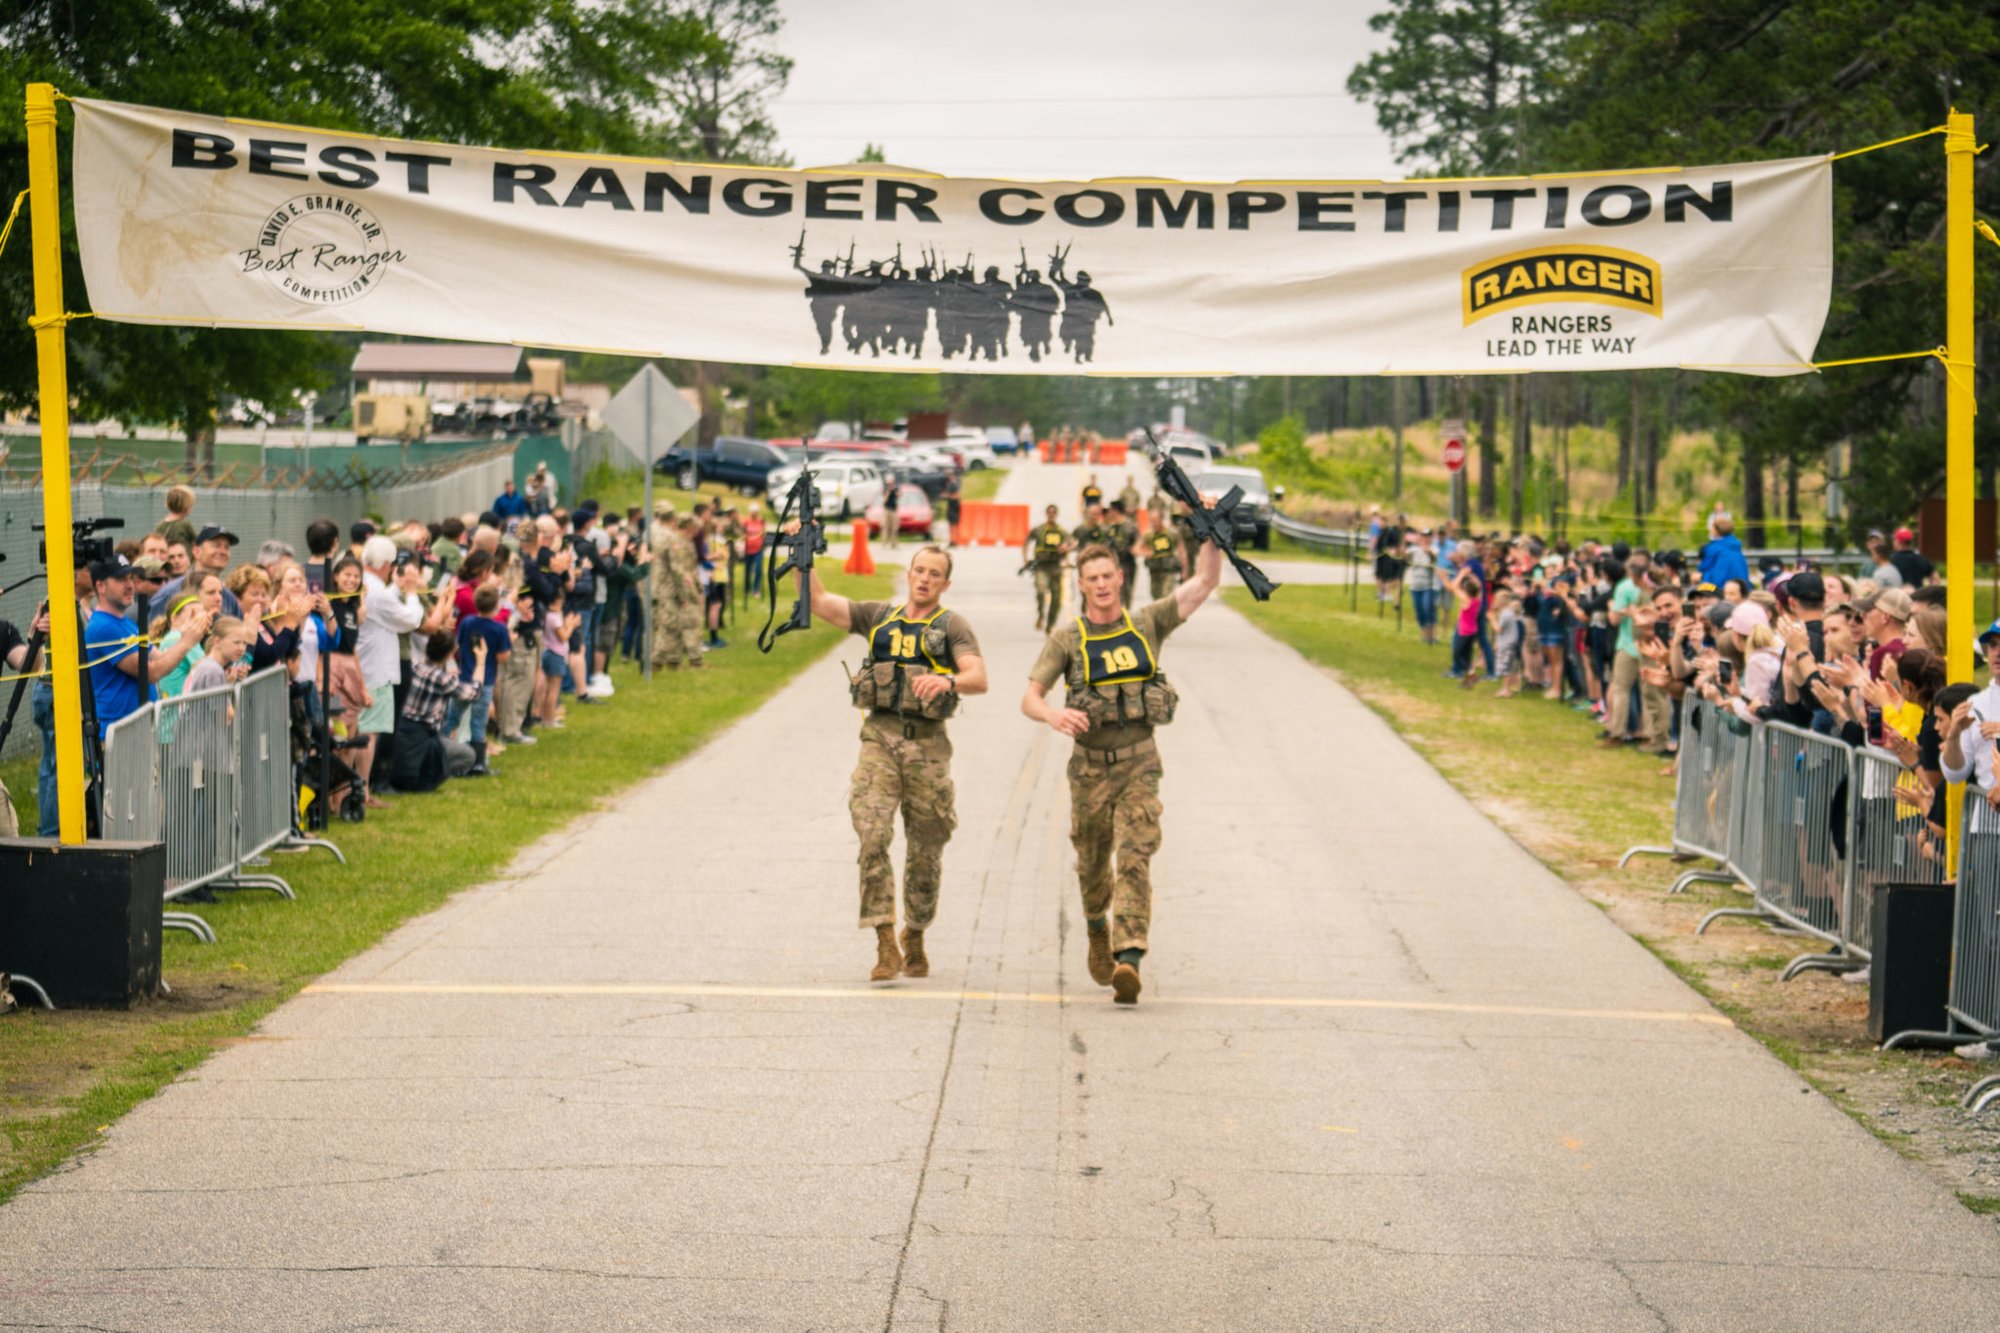 Team 19 of the 101st Airborne Division cross the finish line on Sunday, April 14, during the two-mile buddy run, the final event of the 2019 Best Ranger Competition. Photo by Marty Skovlund Jr./Coffee or Die.